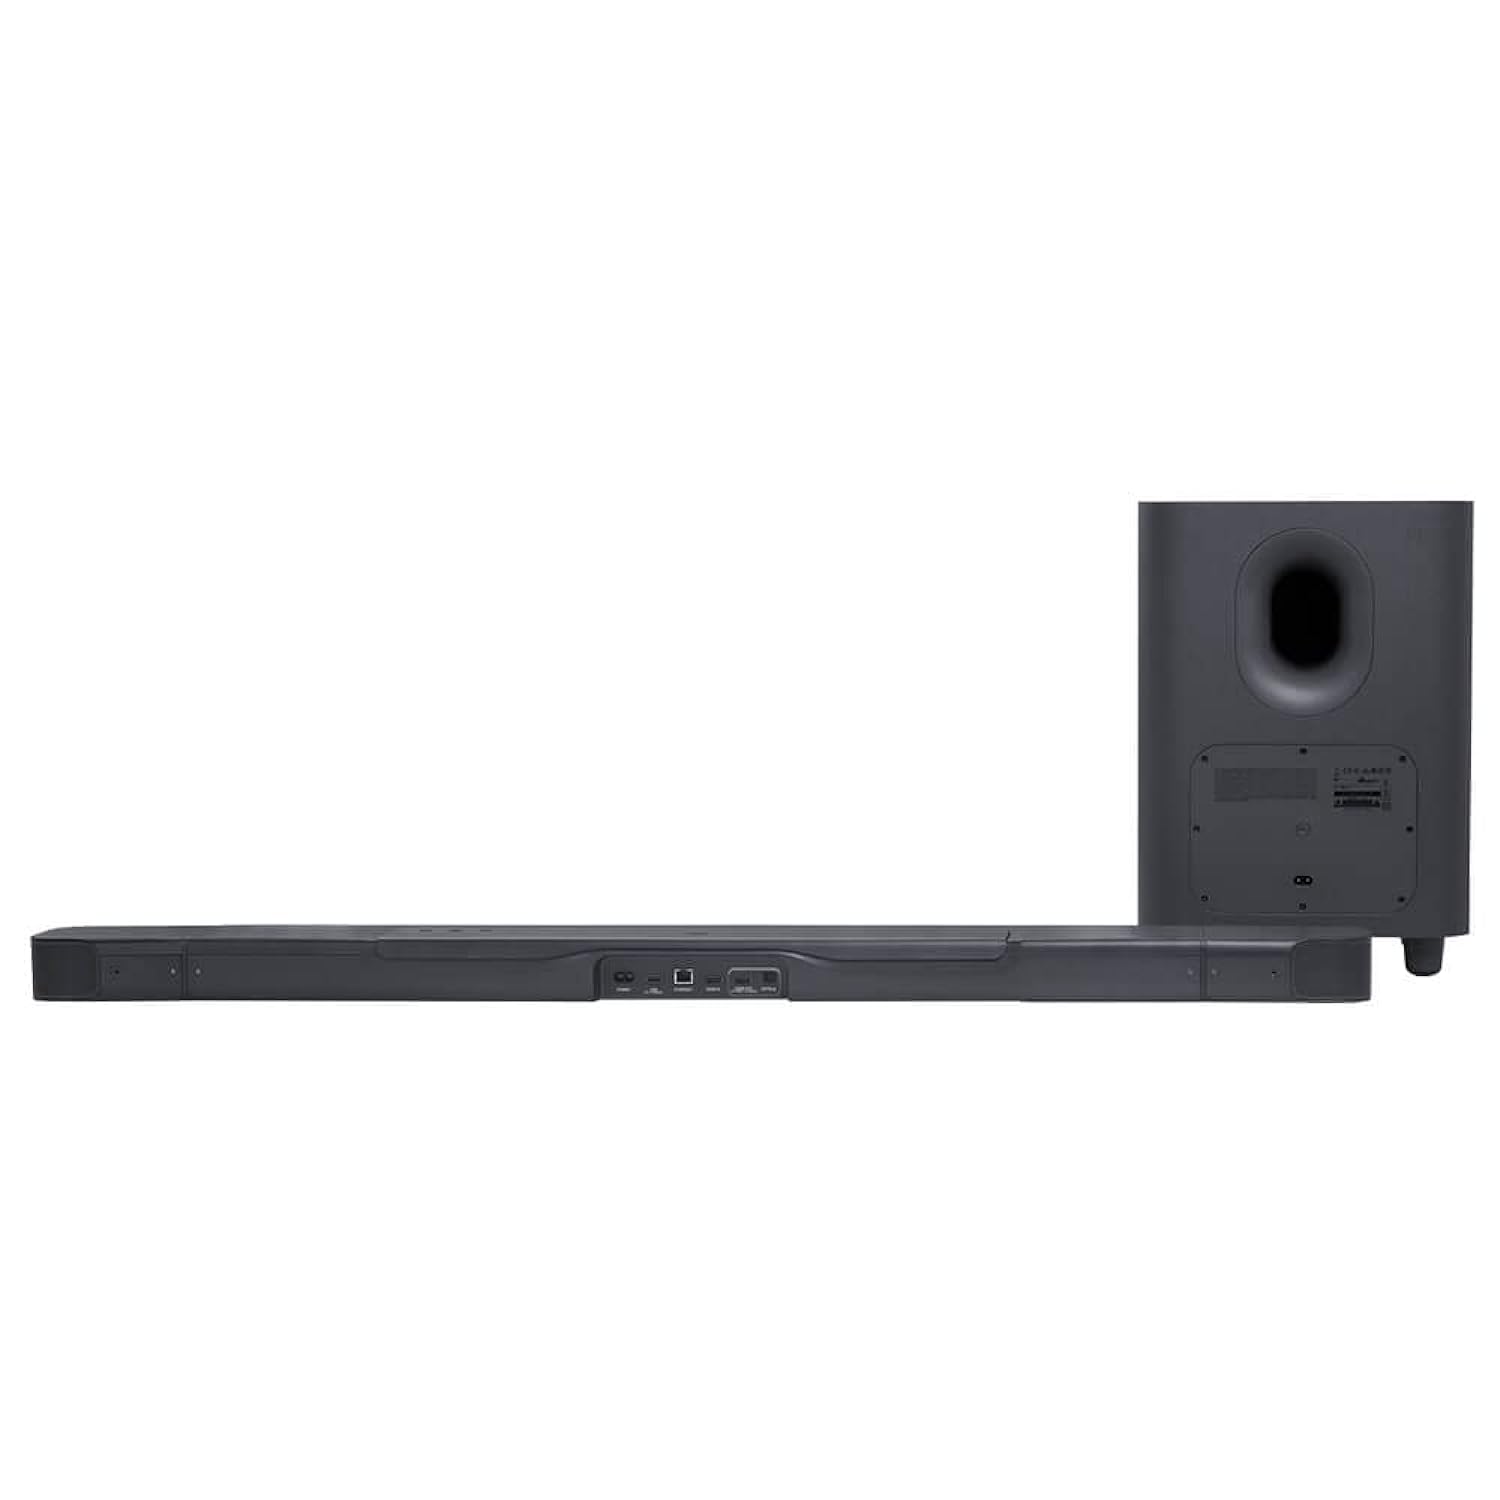 JBL Bar 700: 5.1-Channel soundbar with Detachable Surround Speakers and Dolby Atmos